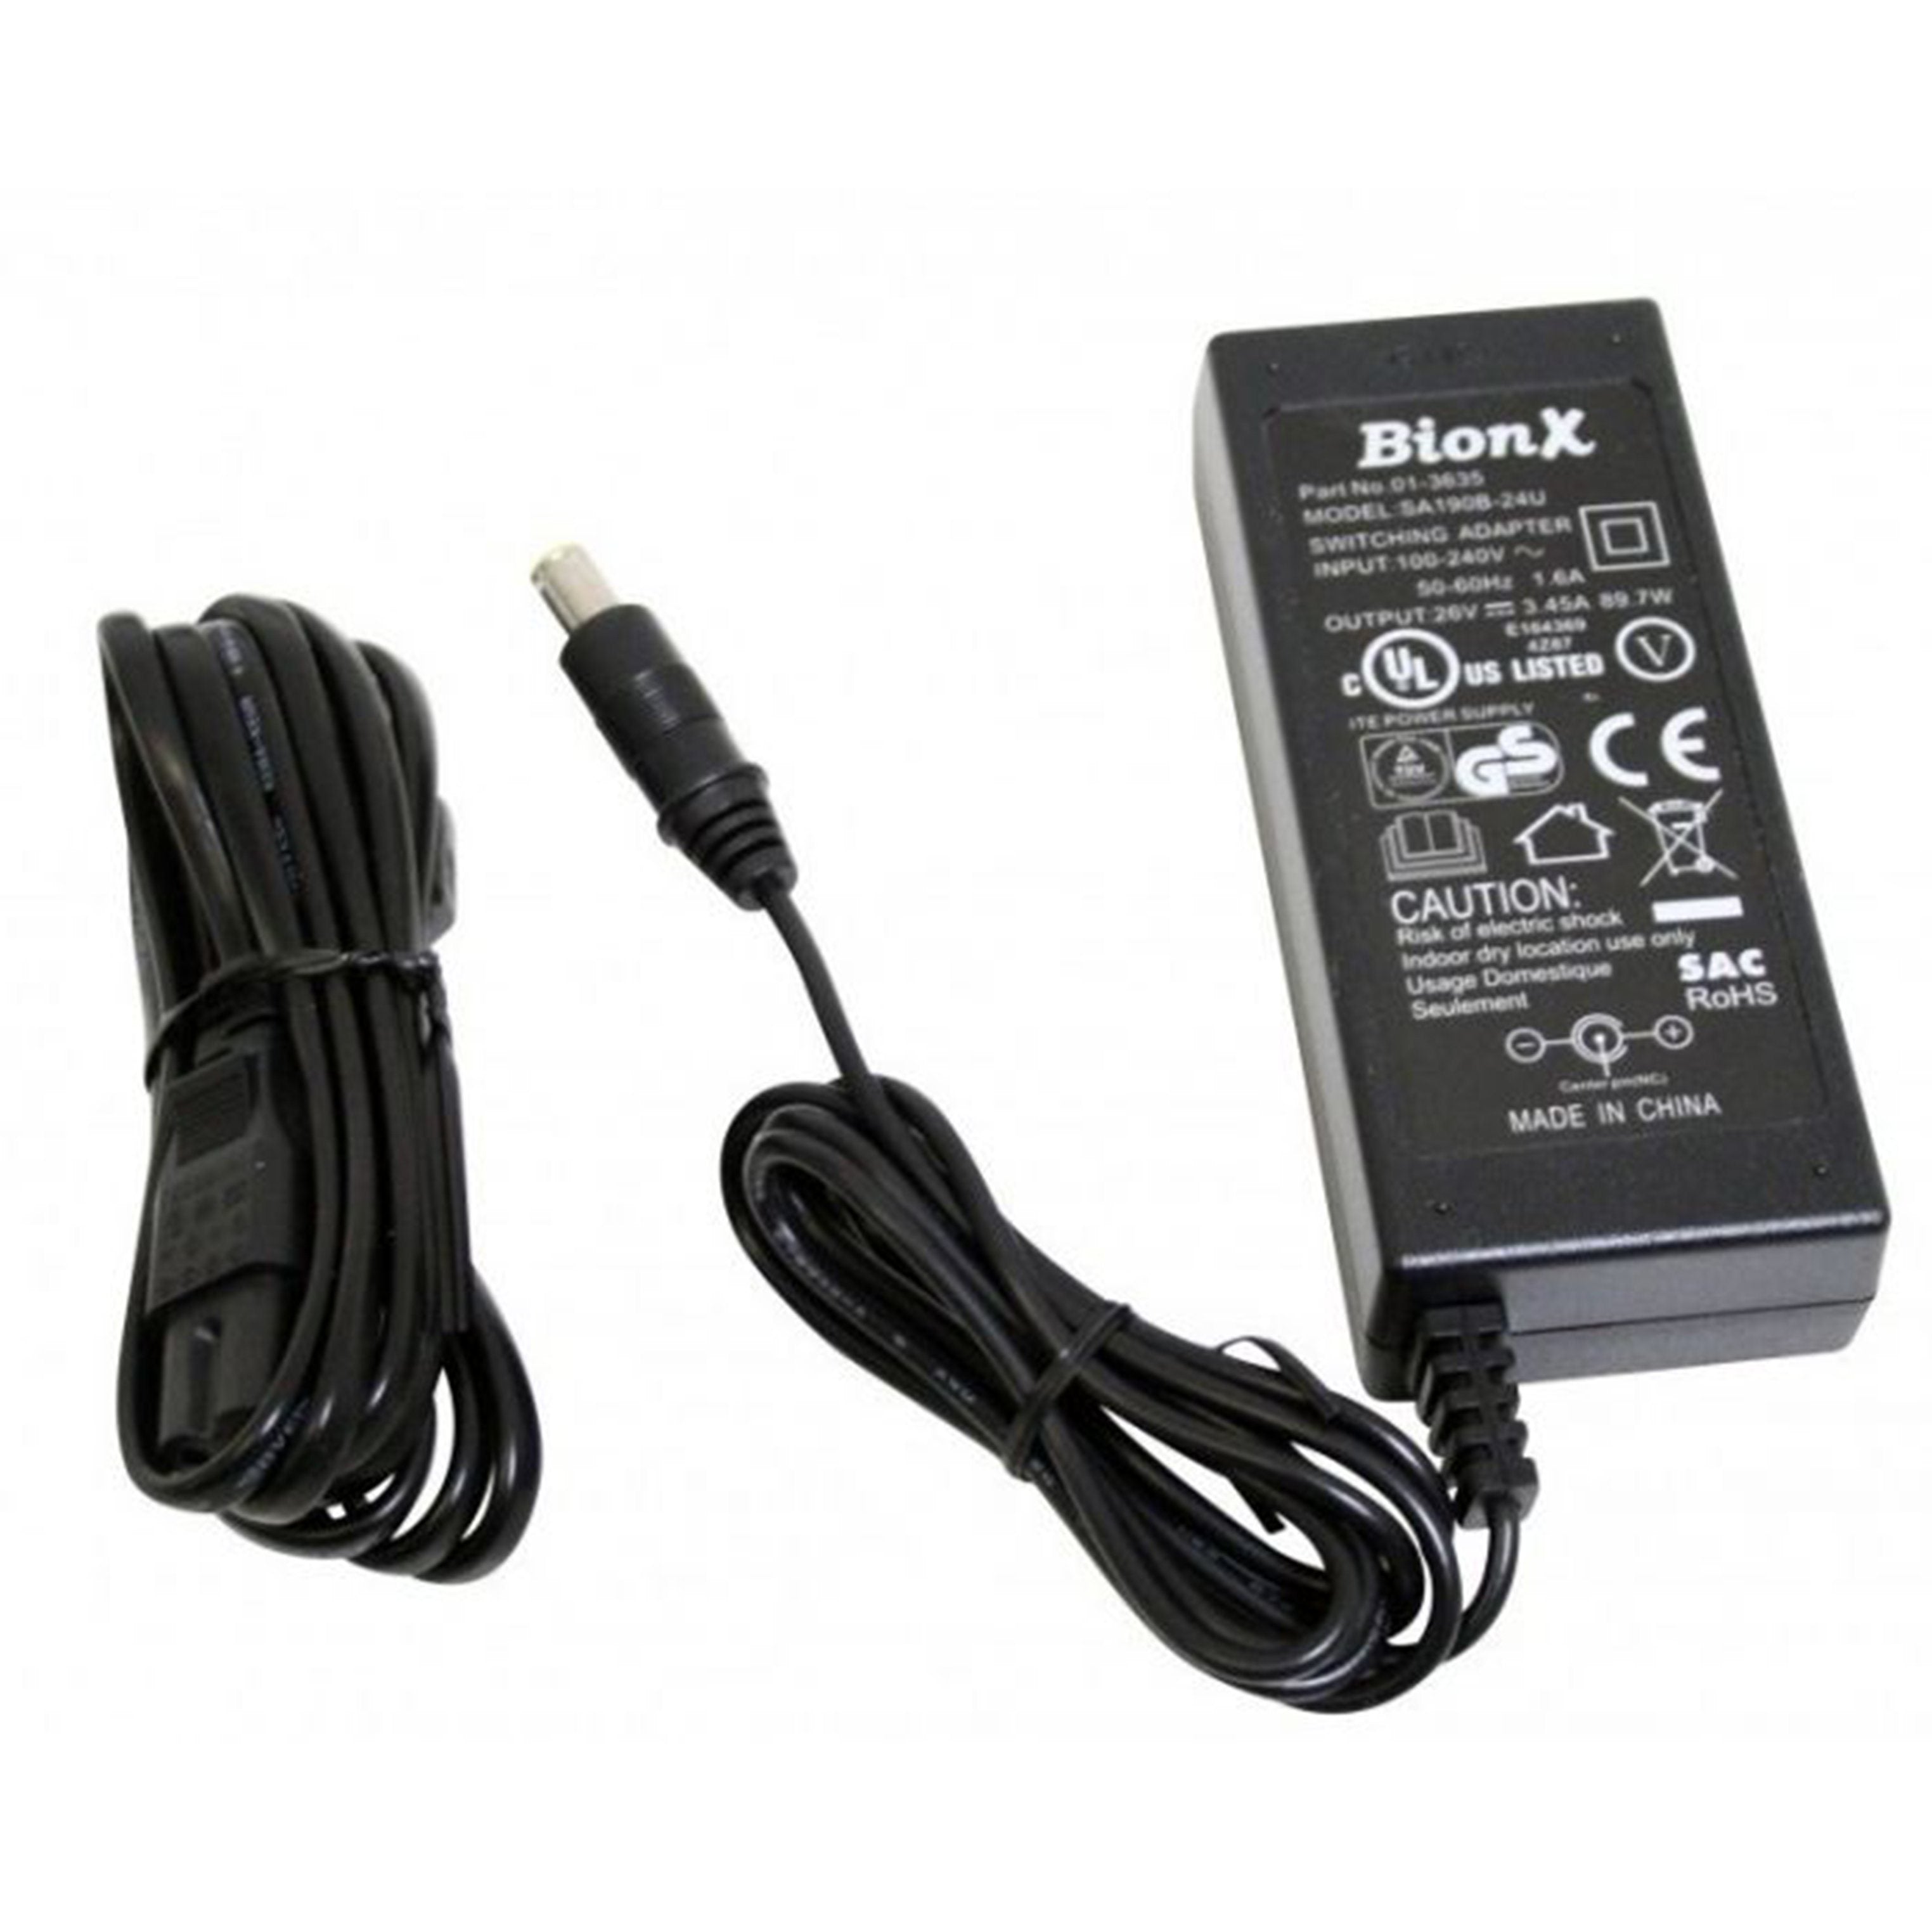 Gezag Top Mevrouw BionX 48V Charger (Power Supply) - OHM Electric Bikes